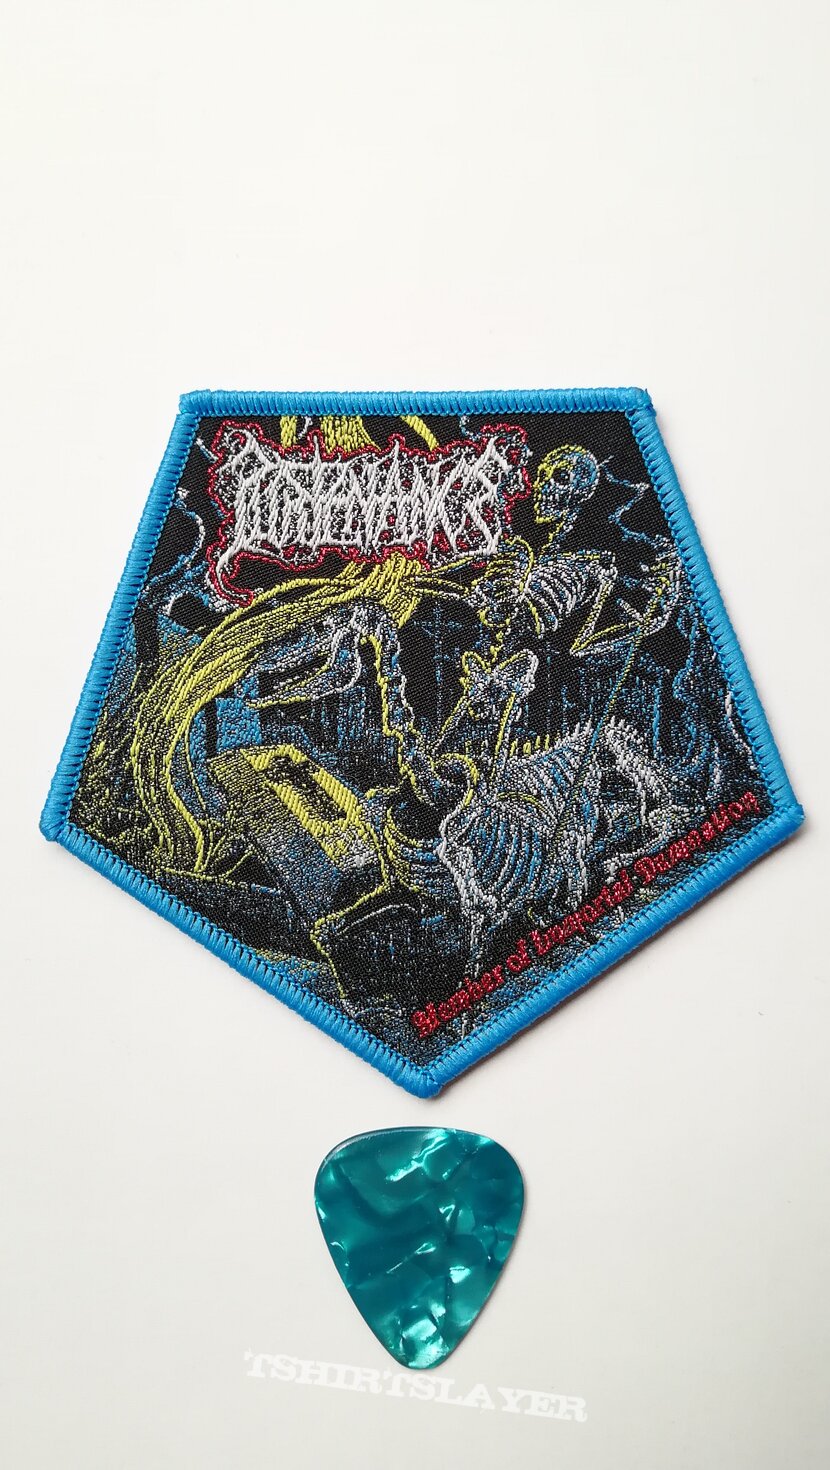 Purtenance - Member Of Immortal Damnation - Patch 